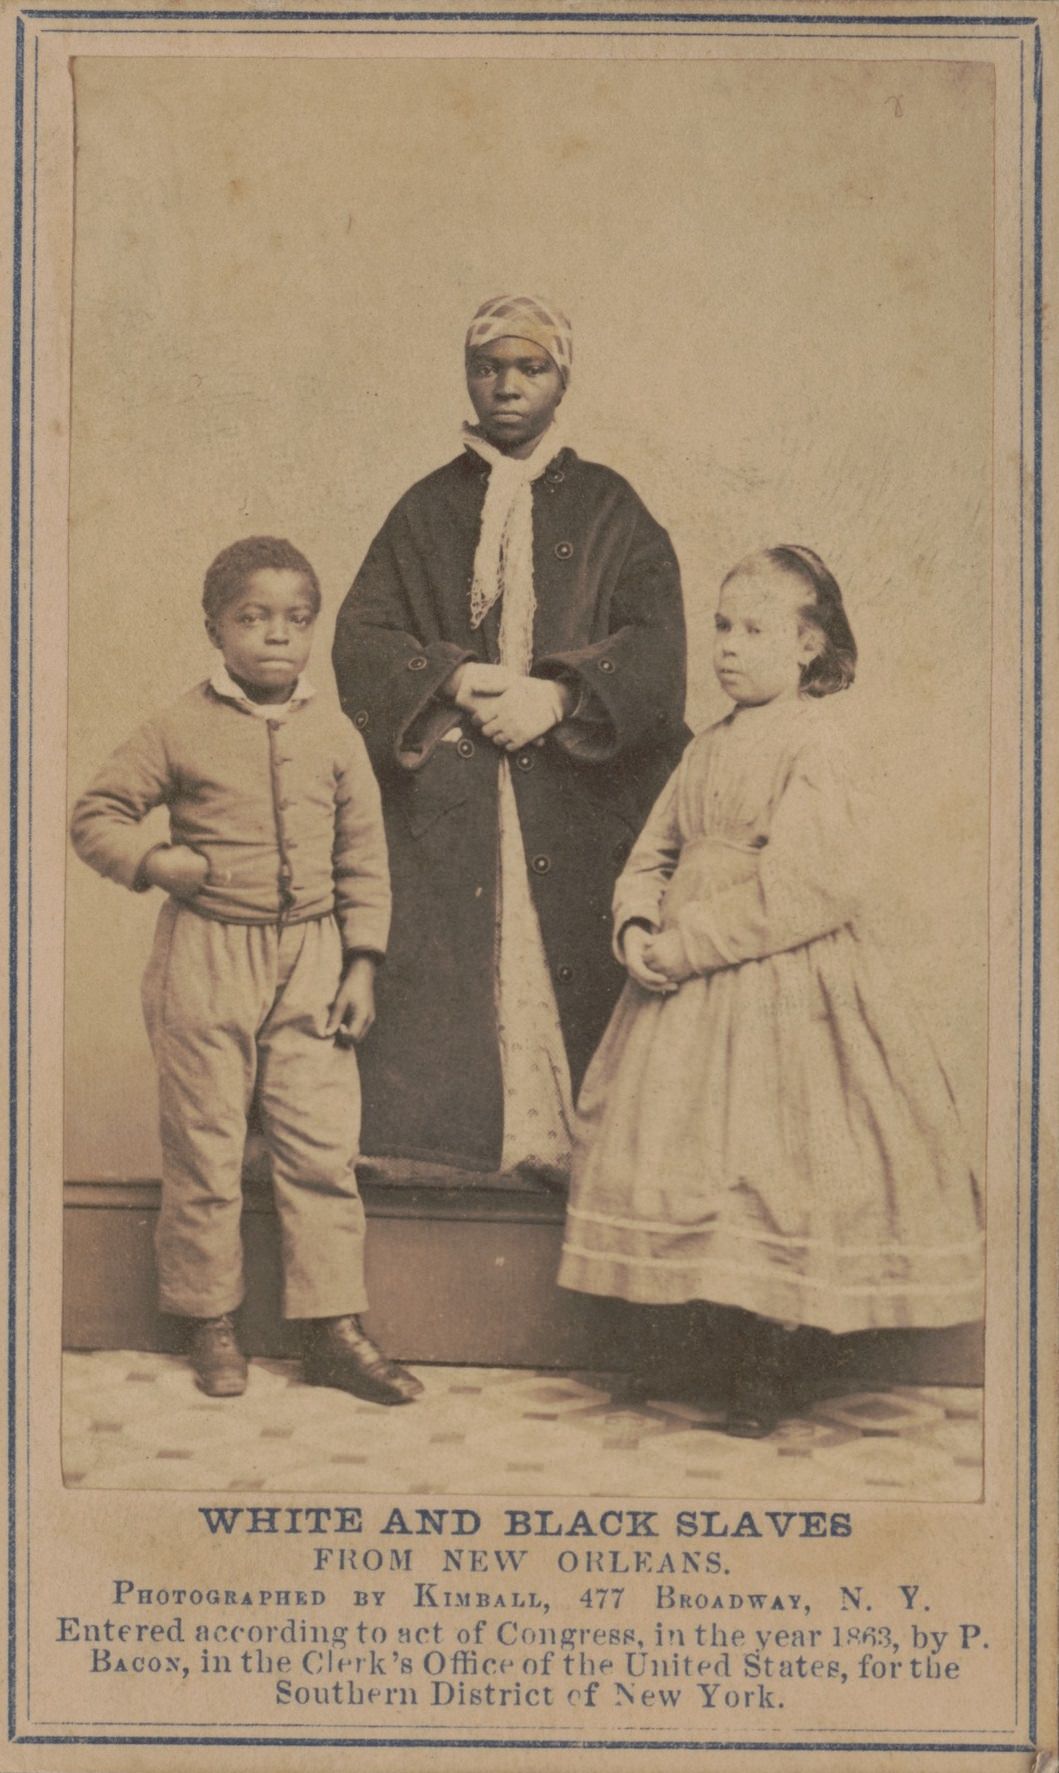 Historic Portraits of white-skinned slave children from New Orleans were used to help the North's war effort in 1863